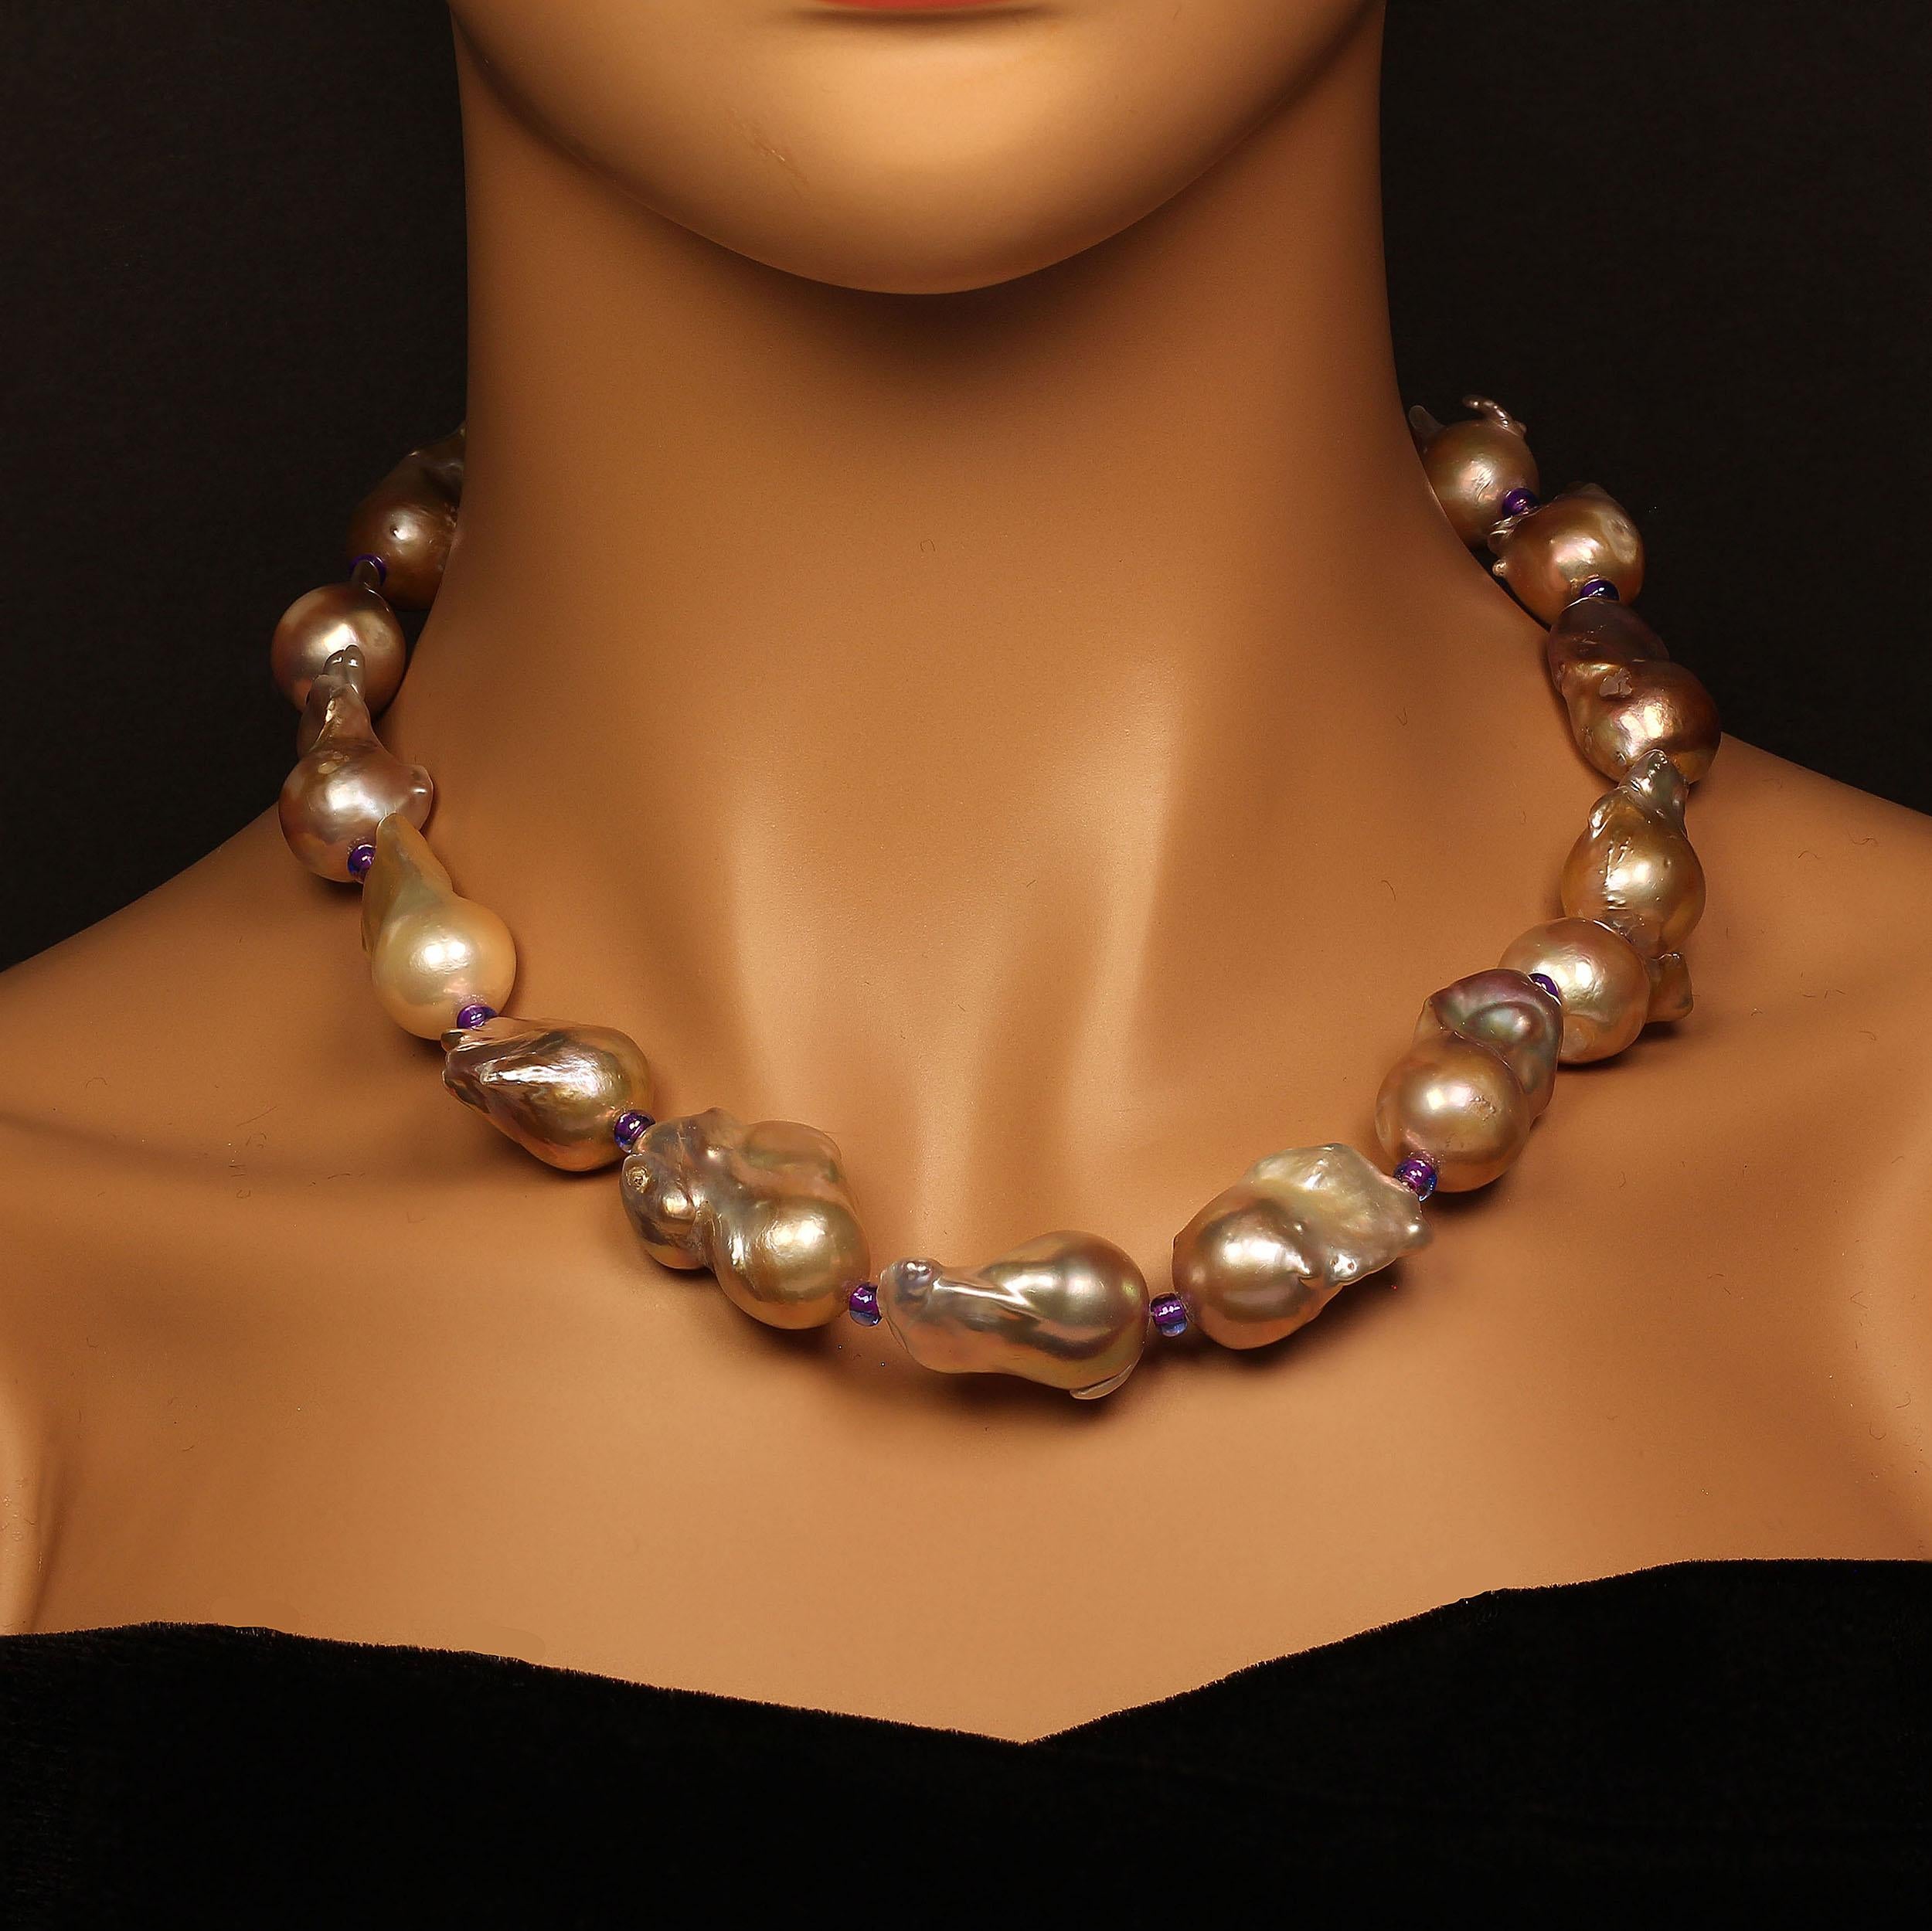 'Nothing gives the luxury of Pearls. Keep them in mind.'  Diana Vreeland 

Custom made necklace of Baroque Pearls in Very Freeform Shapes.  The undertone color is a lovely silver with lots of iridescence, purple, mauve, brown, pink, yellow.  These